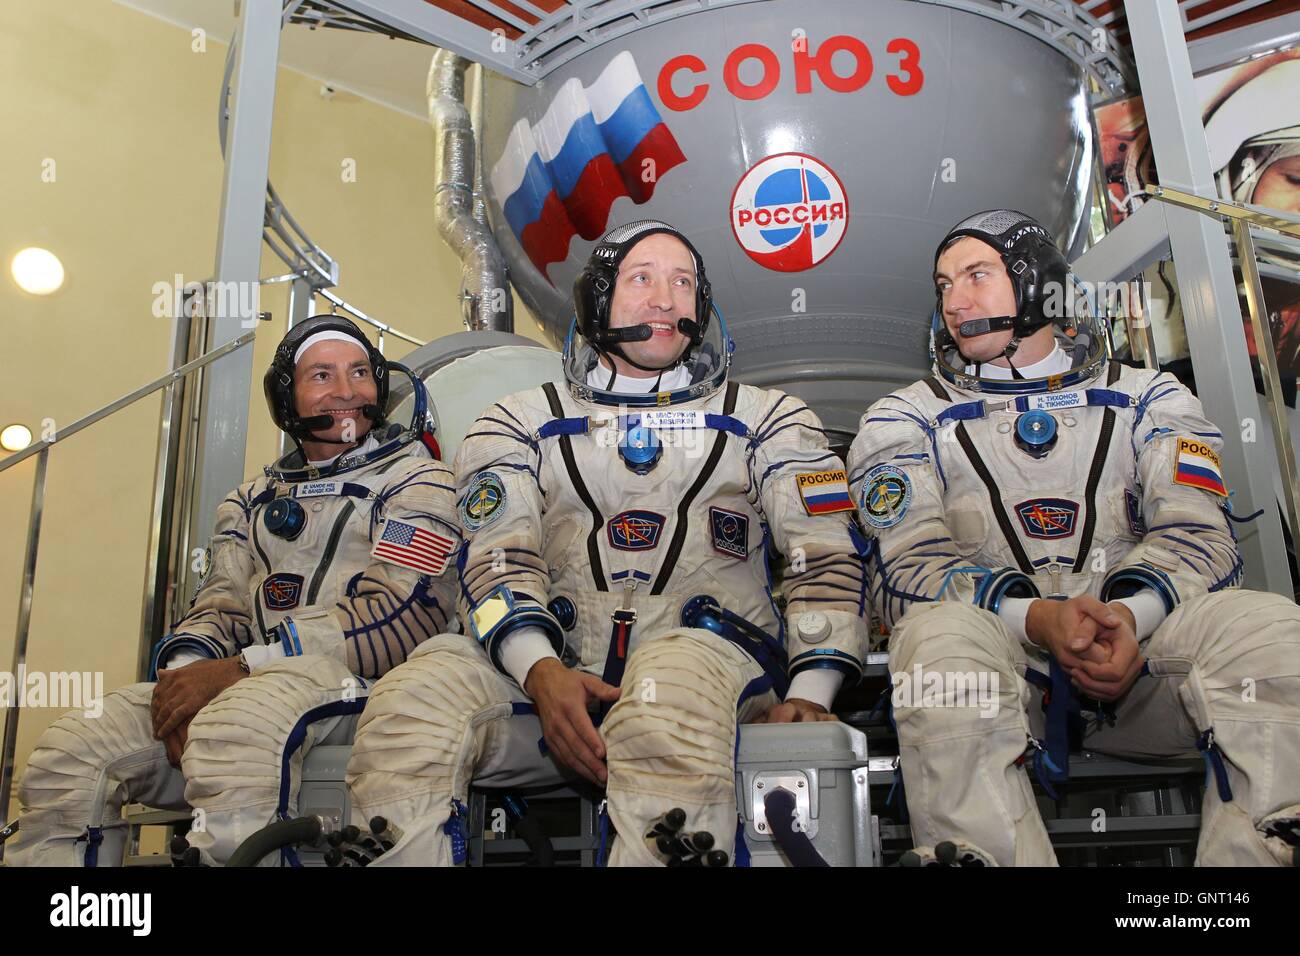 International Space Station Expedition 49-50 backup crew American astronaut Mark Vande Hei, left, and Russian cosmonauts Alexander Misurkin, center, and Nikolai Tikhonov answer reporters questions during final qualification exams at the Gagarin Cosmonaut Training Center August 30, 2016 at Star City, Russia. Stock Photo